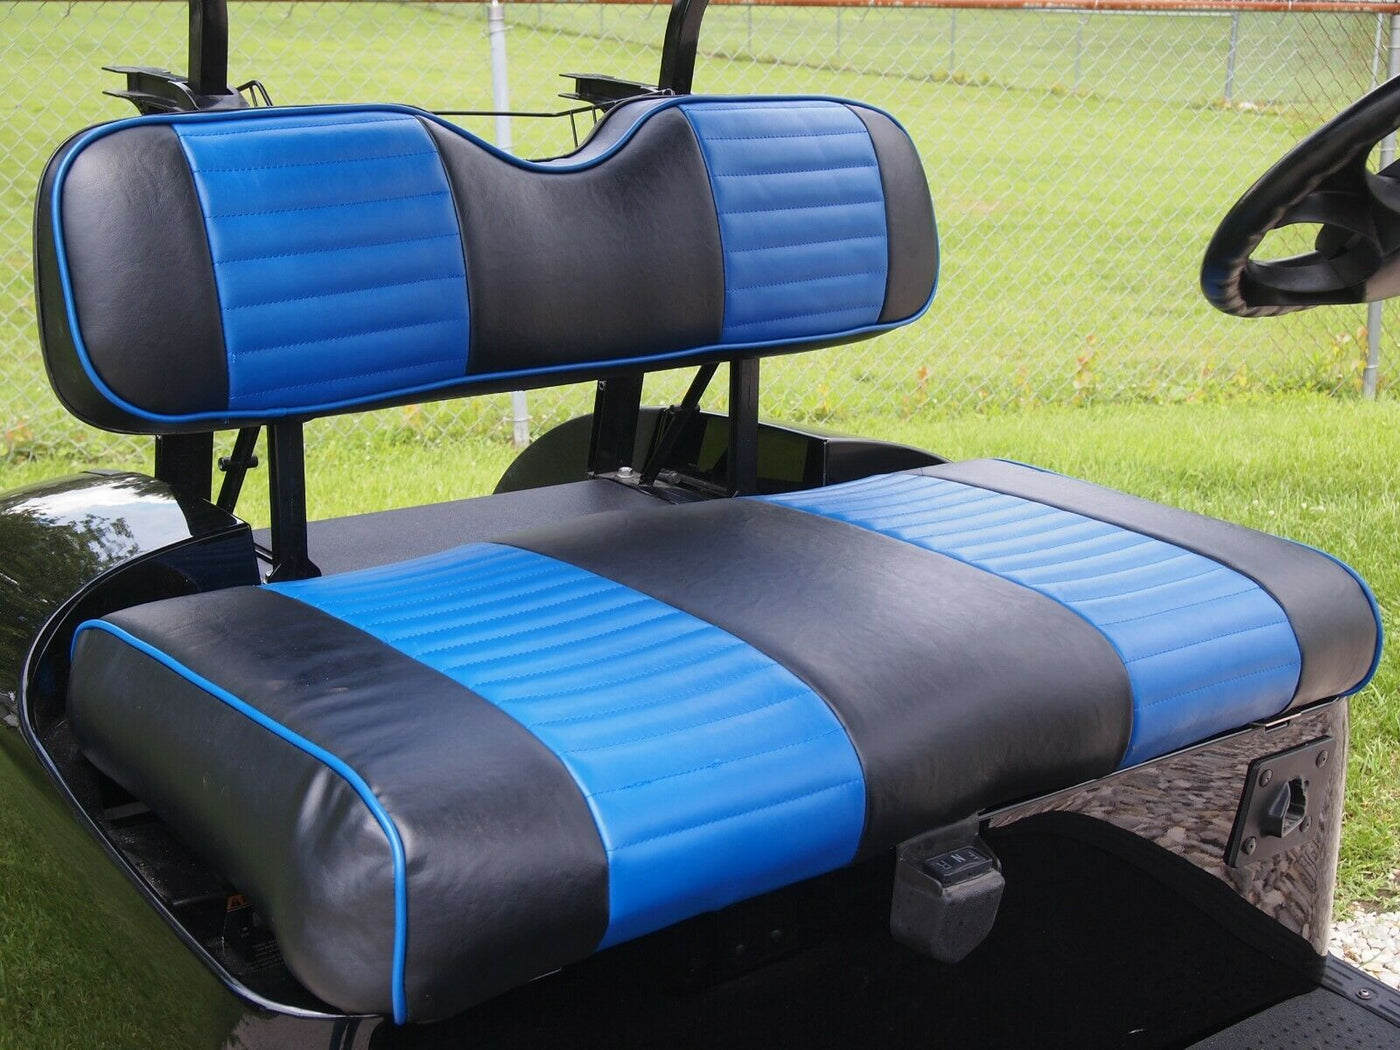 Custom Pleated Blue & Black Fits Ez-Go (Ezgo) Txt/Rxv 1996-Current) or Club Car DS (2000-2013) Includes Both Front Rear Seat Covers